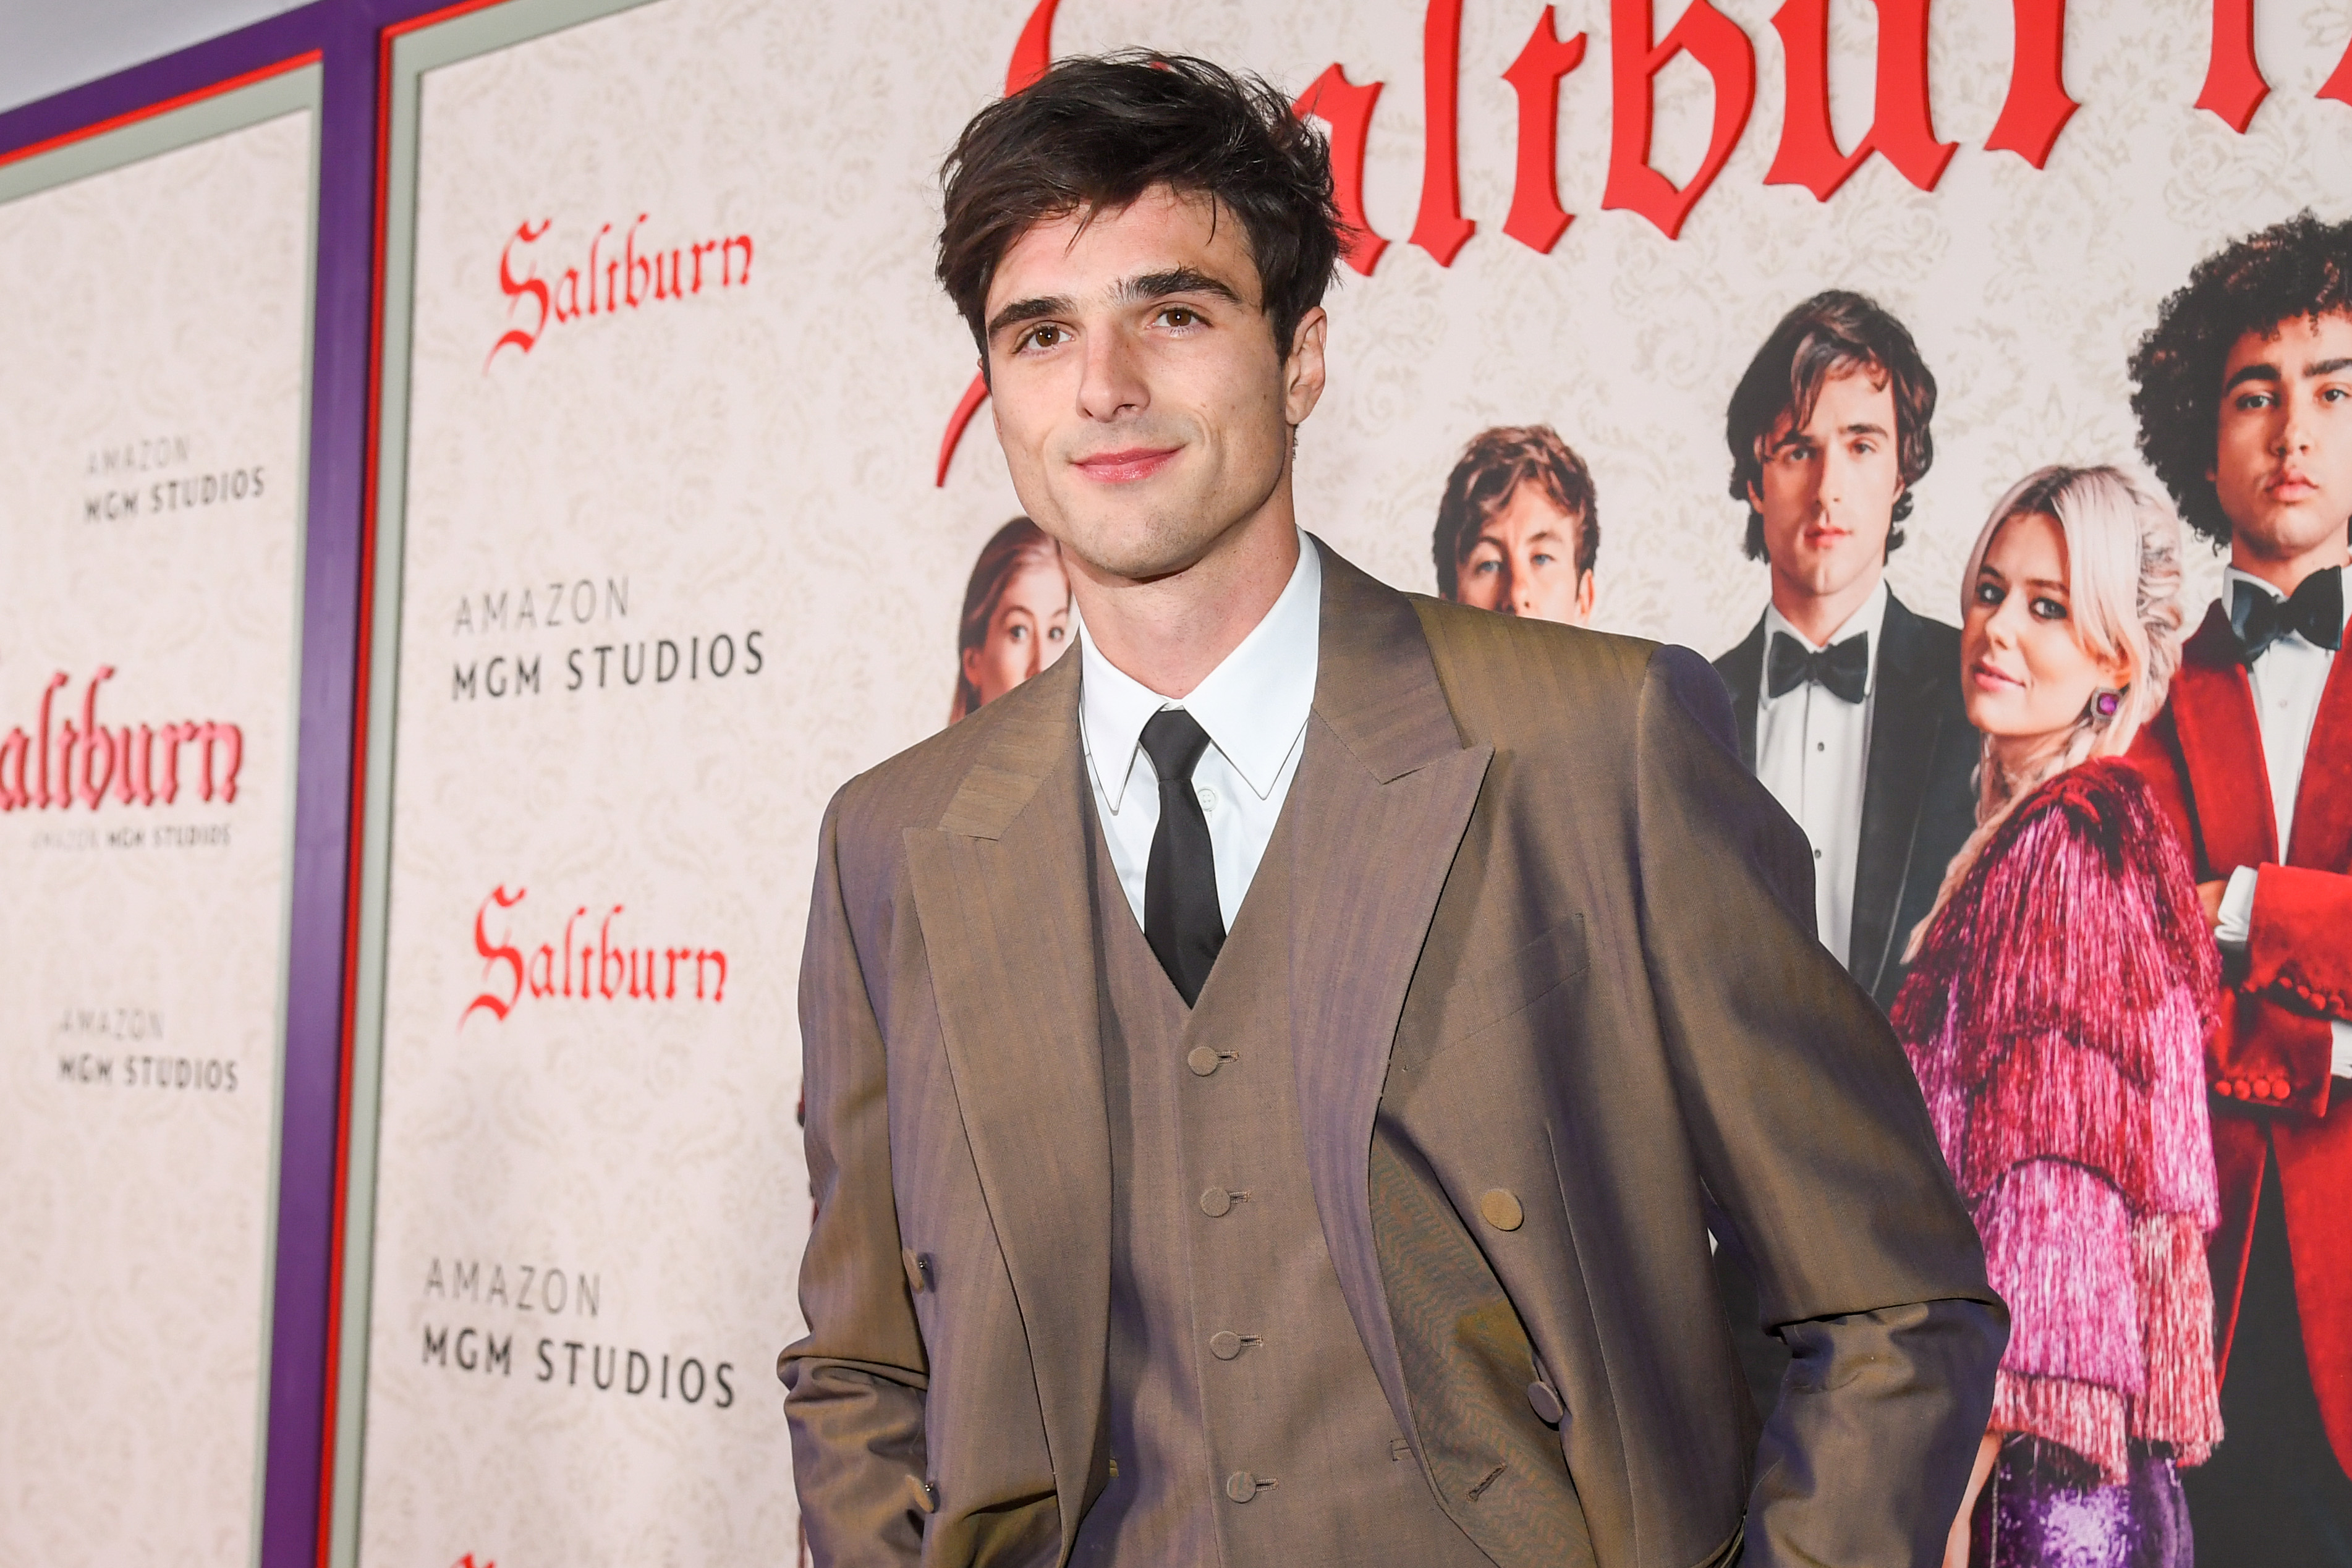 Close-up of Jacob in a suit, tie, and vest at a Saltburn event